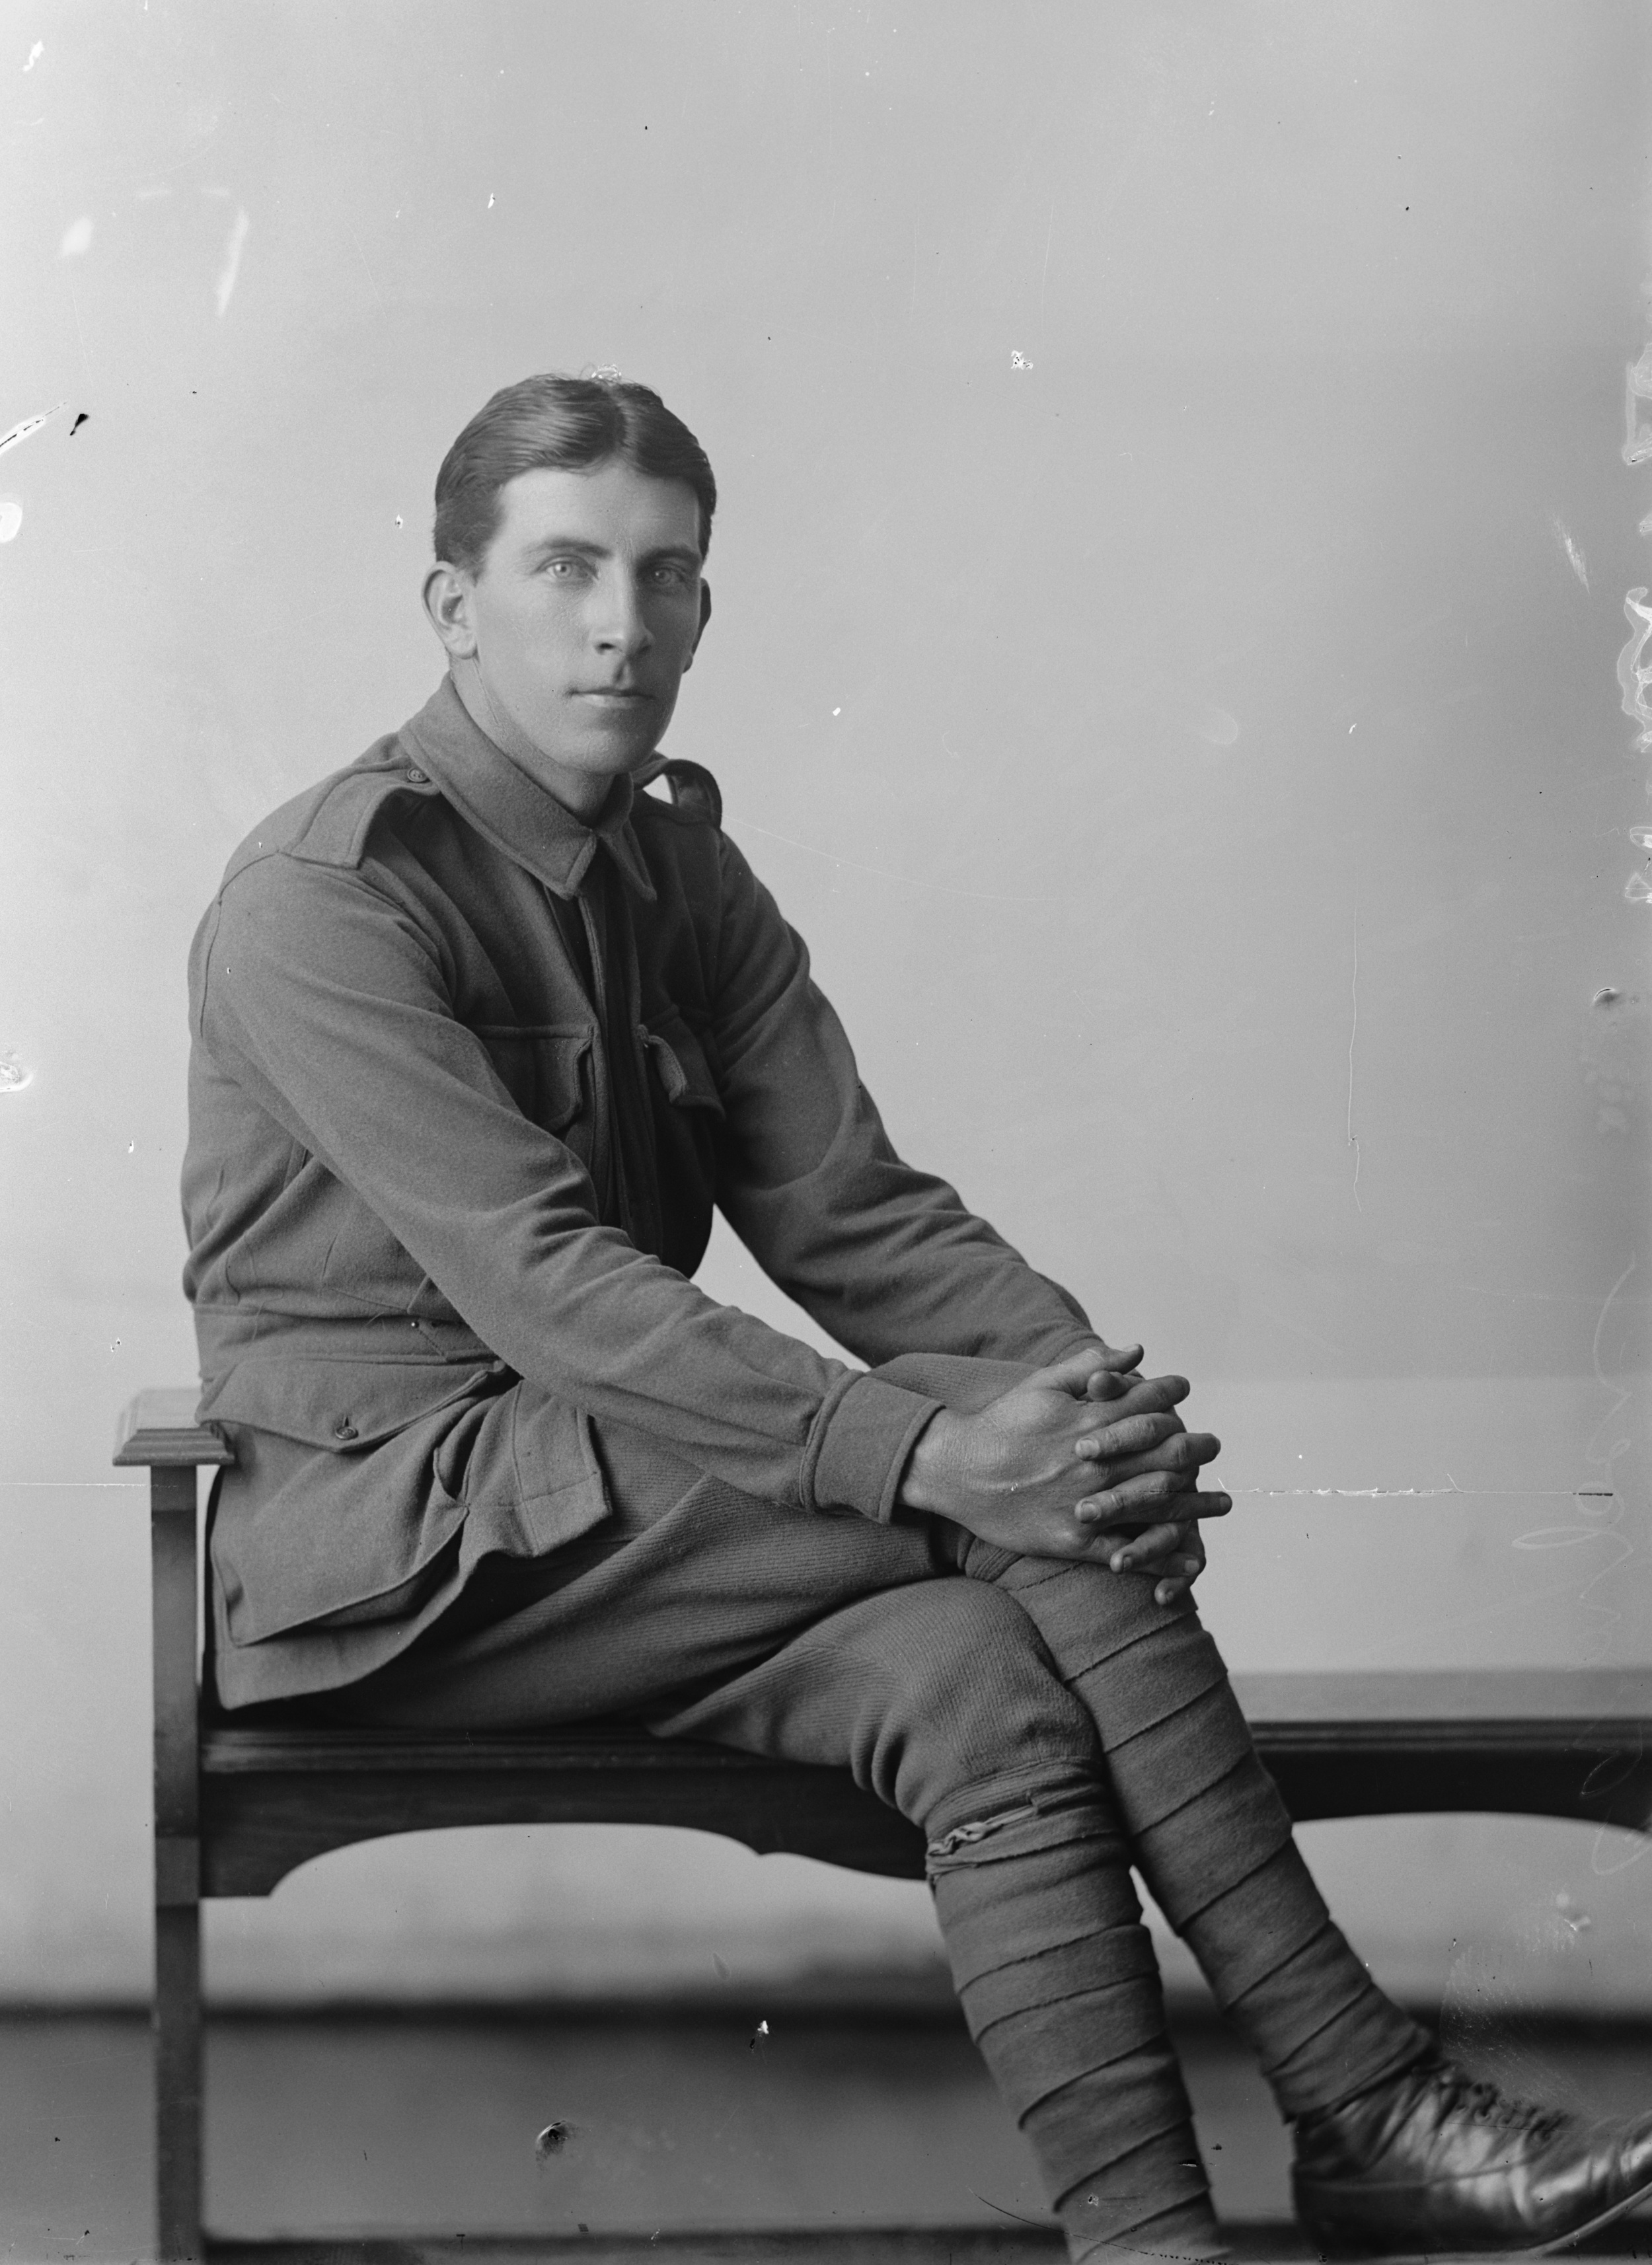 Photographed at the Dease Studio, 117 Barrack Street Perth WA Image courtesy of the State Library of Western Australia: 108196